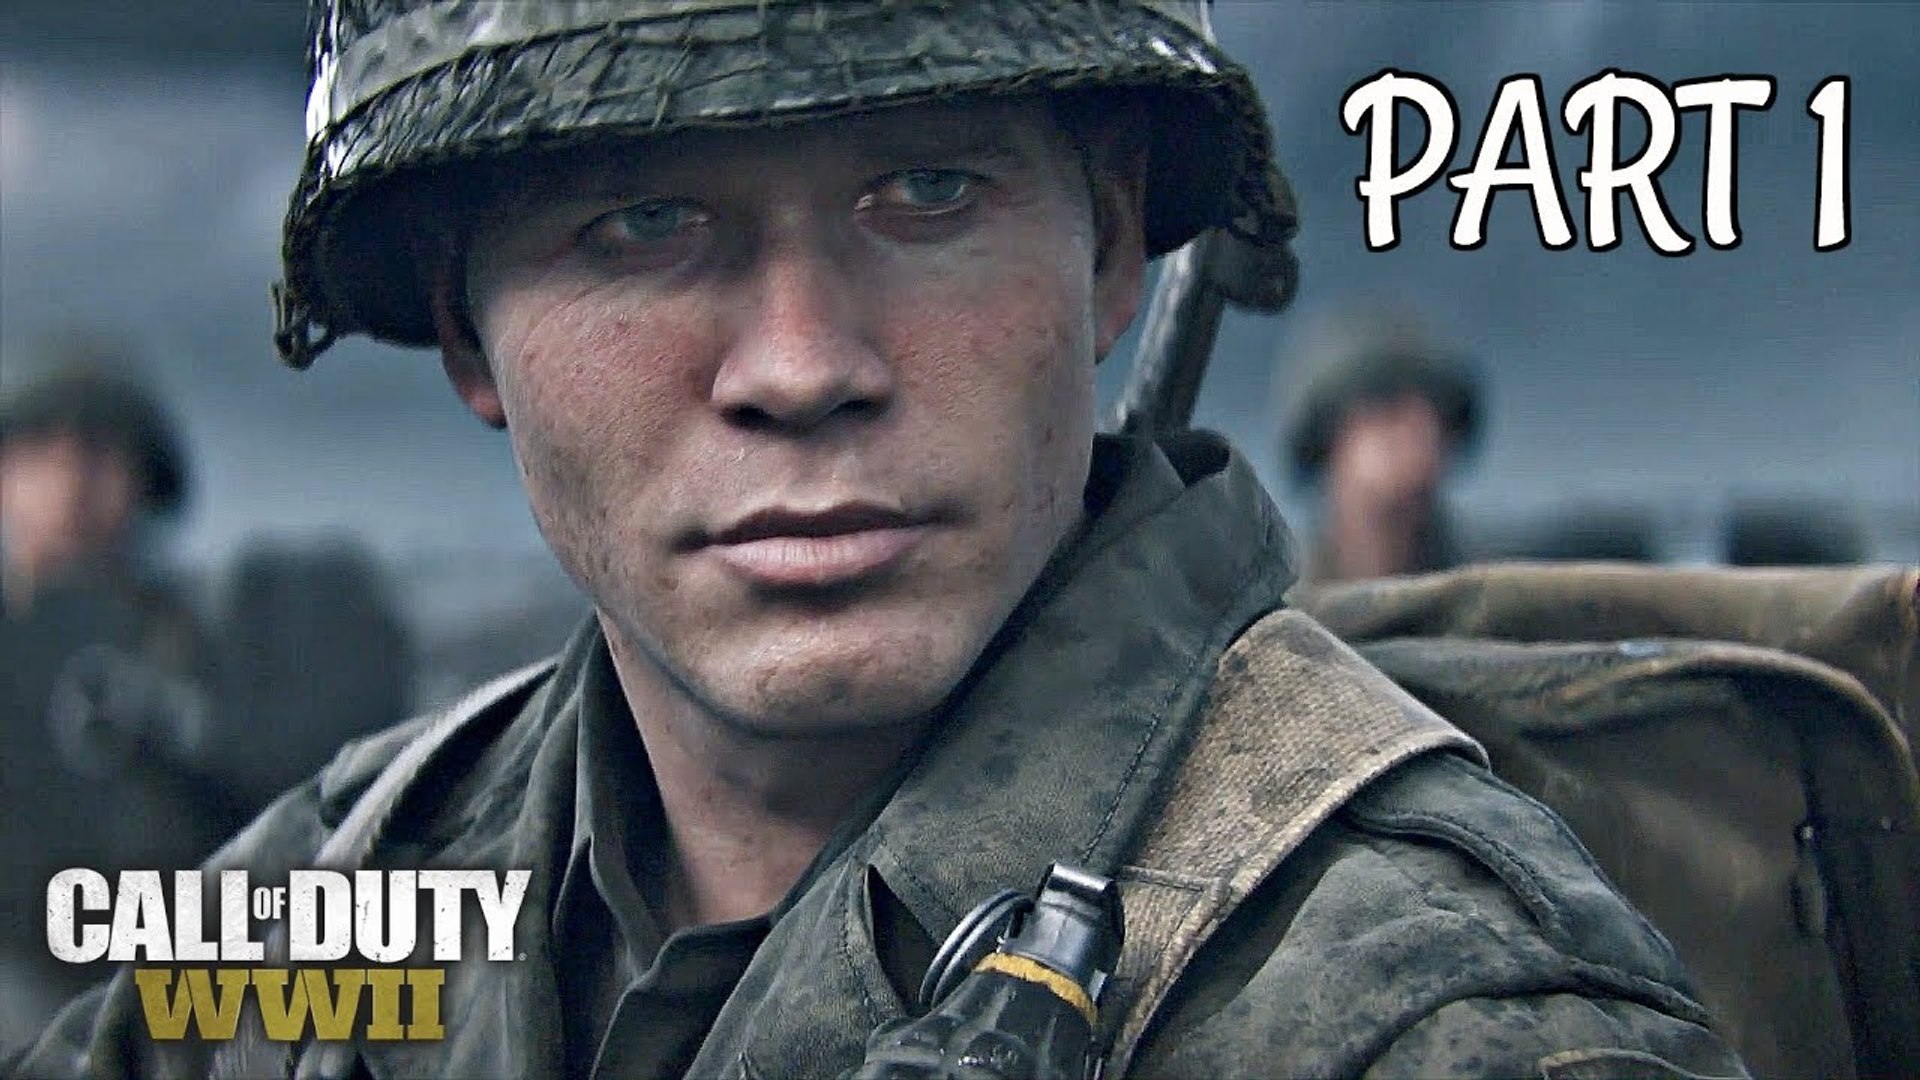 CALL OF DUTY WW2 PS5 Gameplay Walkthrough Part 1 Campaign FULL